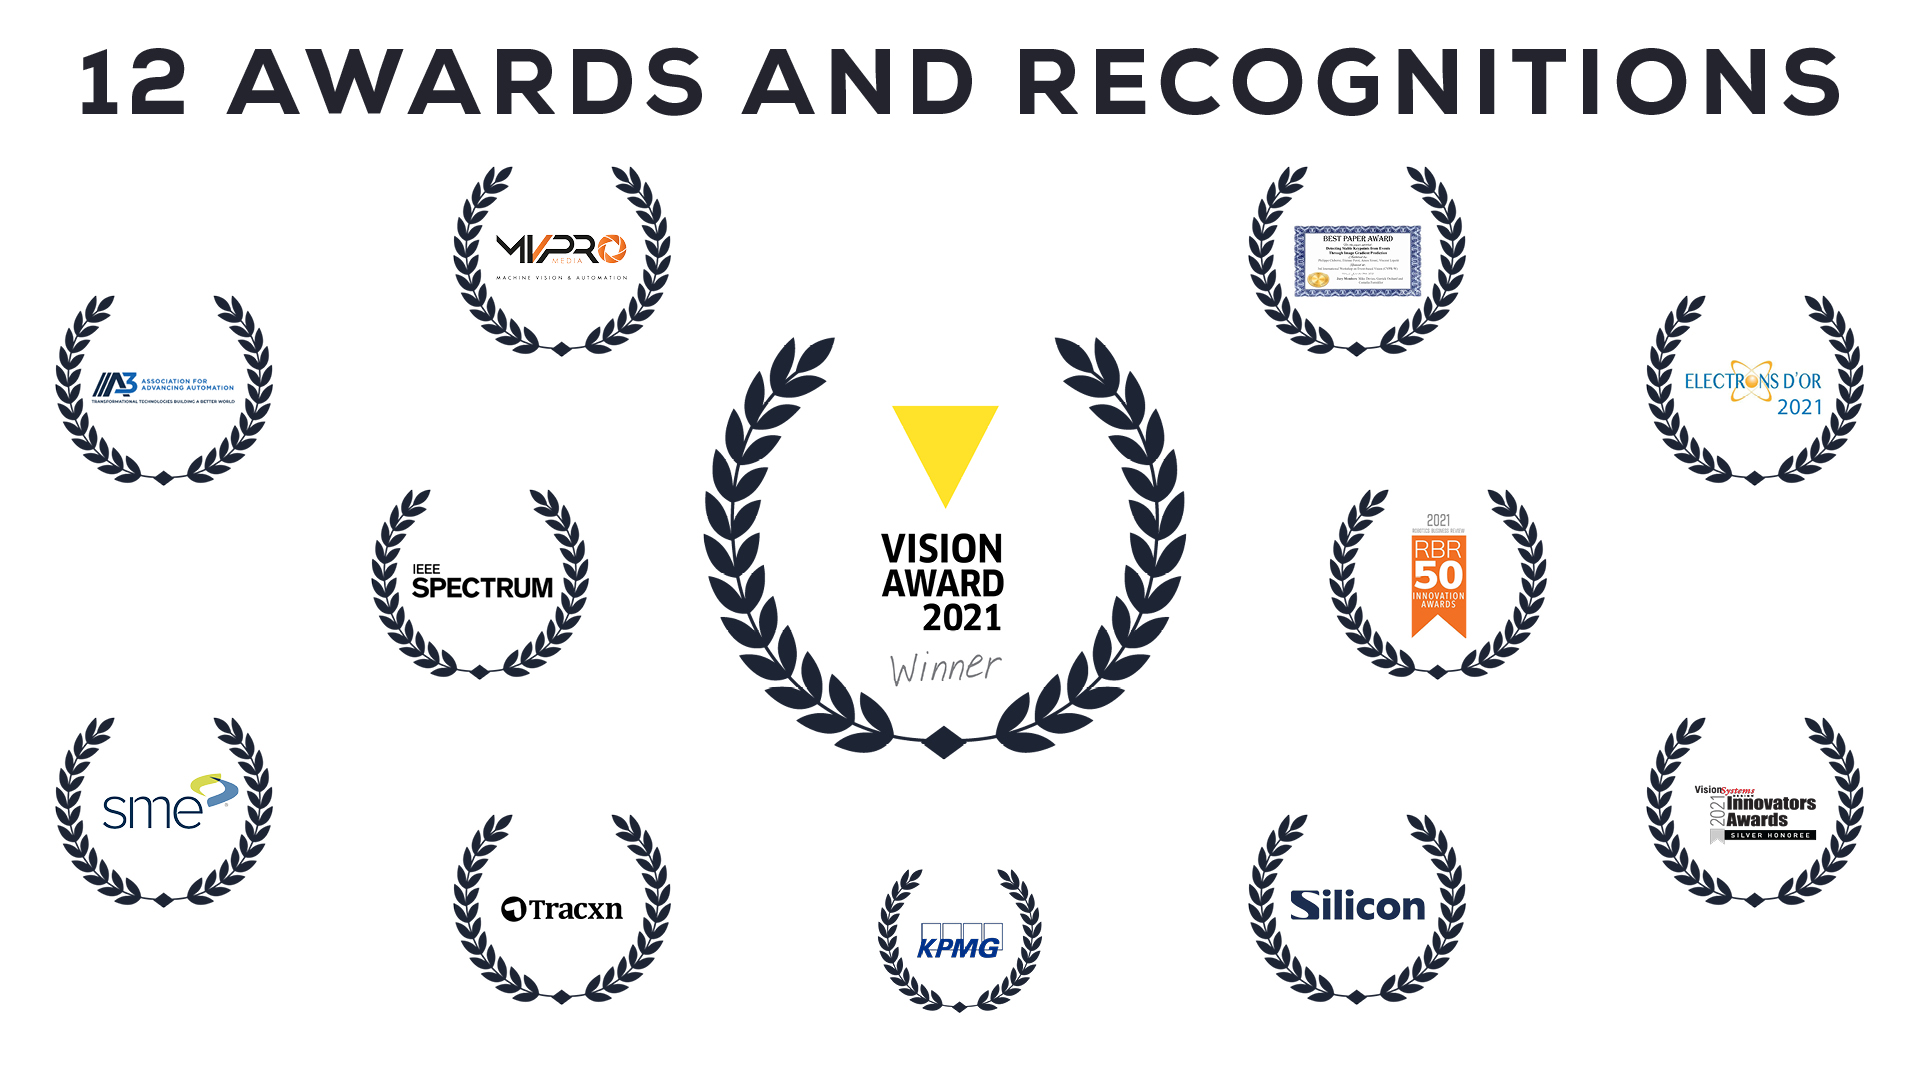 Awards won by Prophesee in 2021 - Vision Award, RBR 50, Vision System Design, KPMG, IEEE Spectrum, SME 